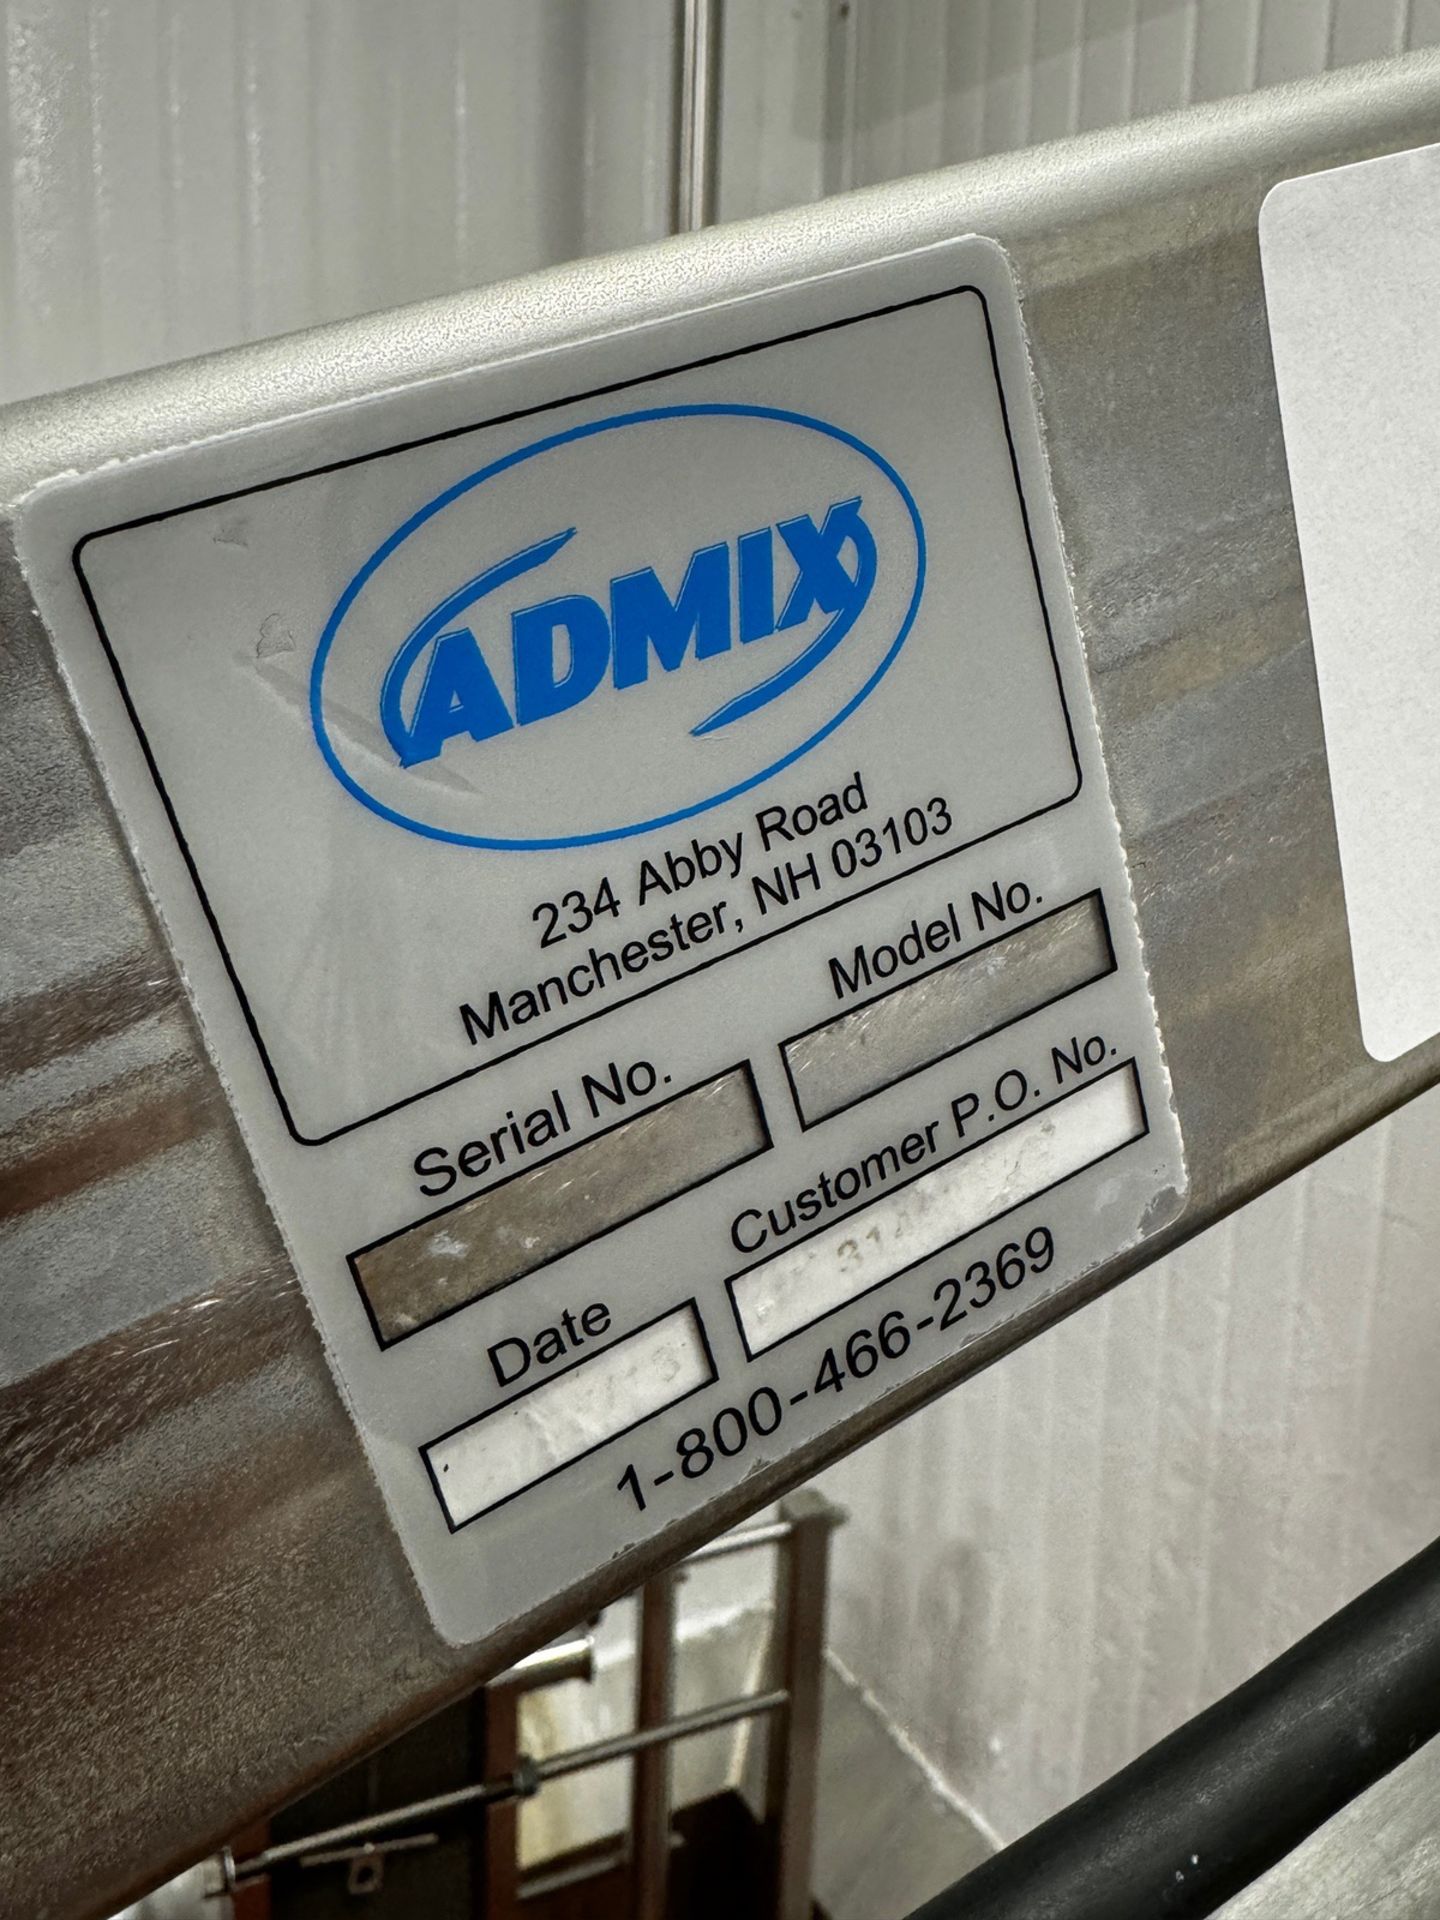 Admix 7.5 HP High Speed Disperser and Gantry Mount with Vacon Variable Speed Drive Control - Image 2 of 5